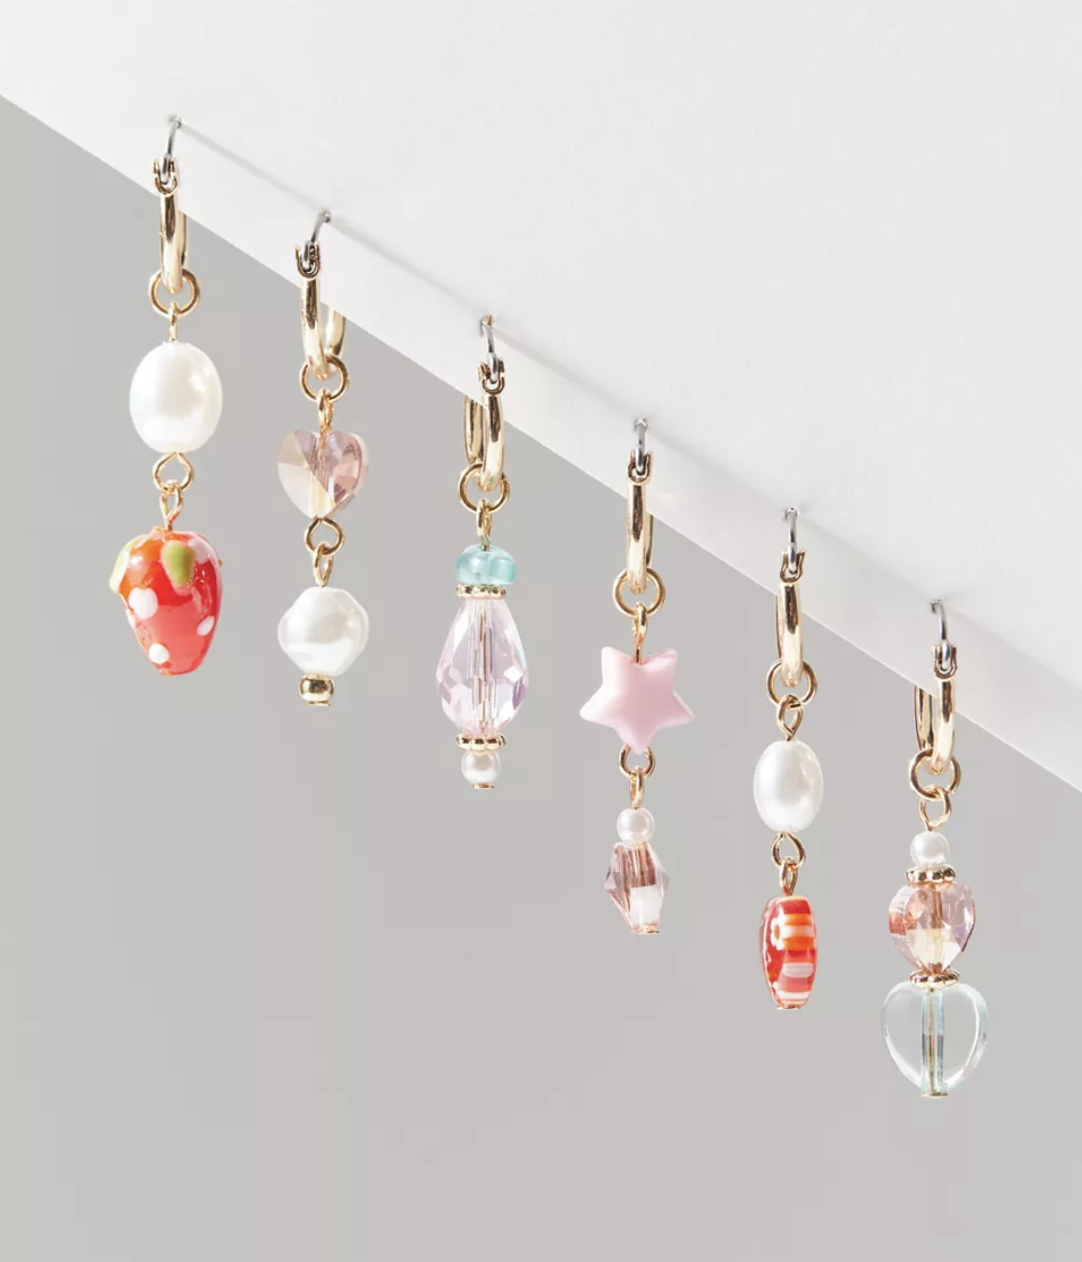 all six of the earrings hanging from a ledge in front of a plain backdrop